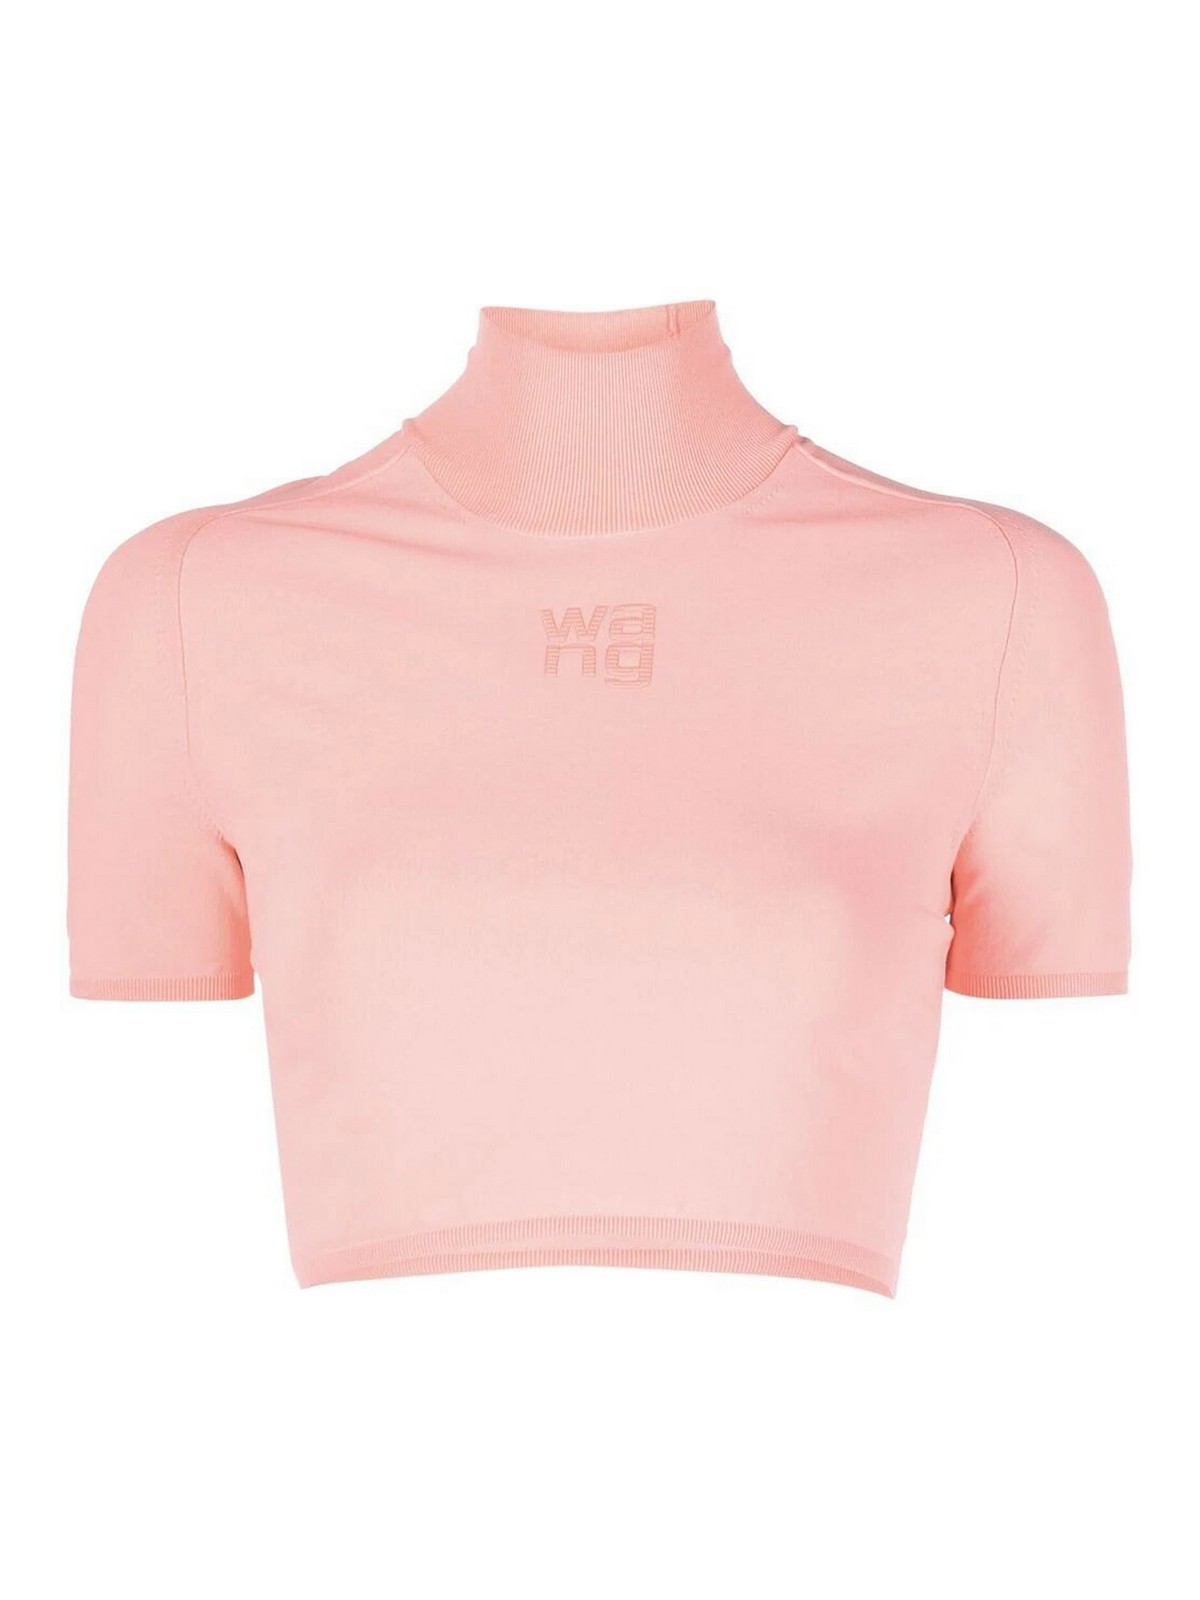 Tops & Tank tops Alexander Wang - High neck cropped top with logo